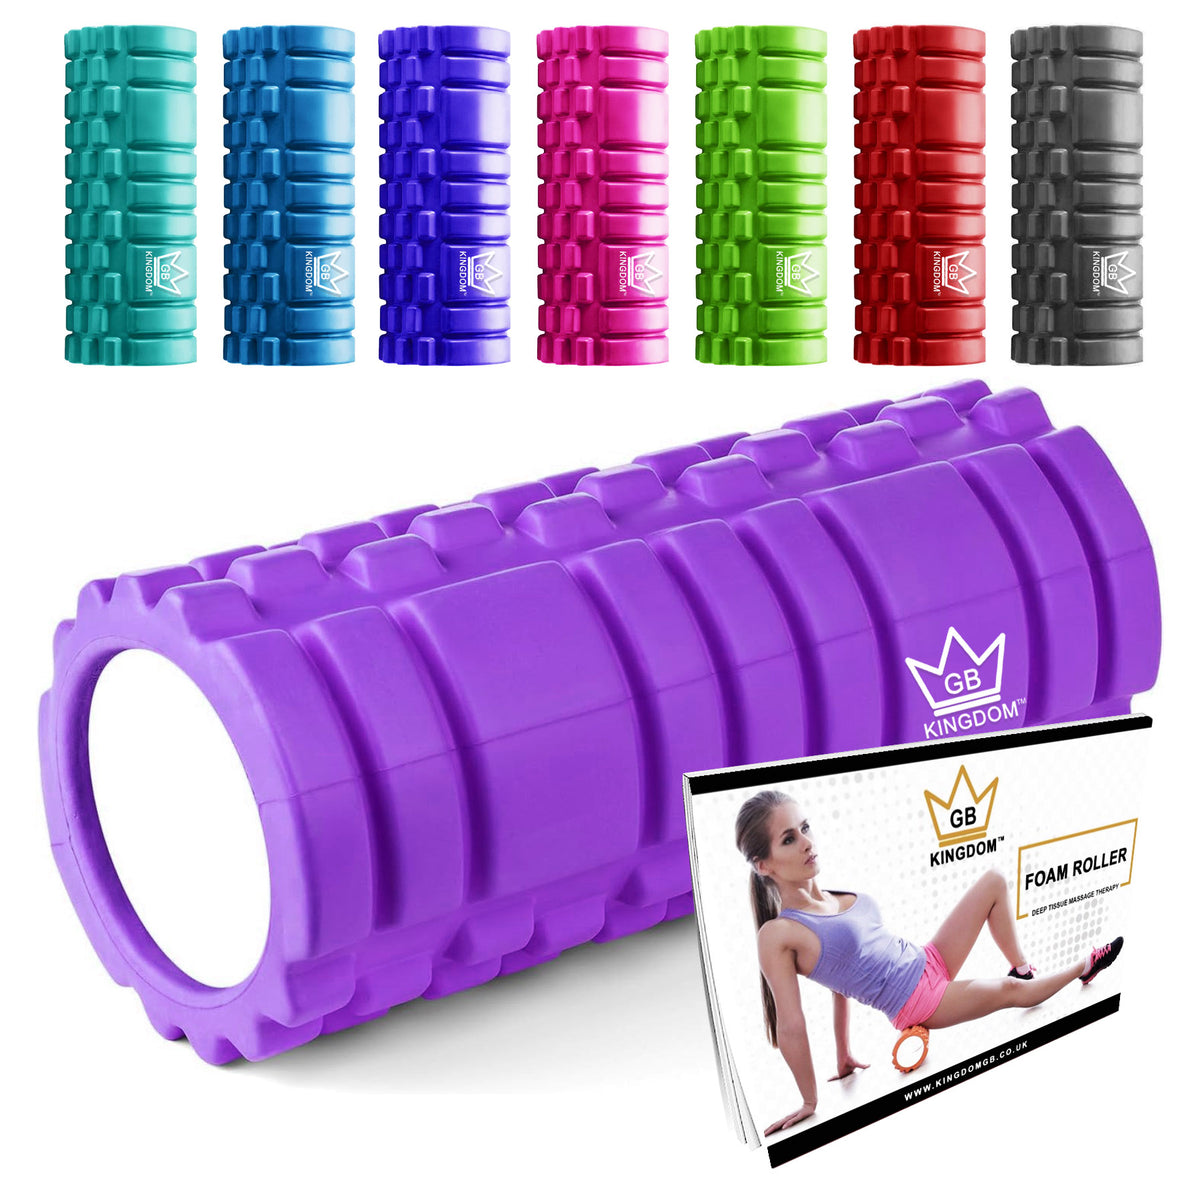 Kingdom GB Grid Foam Roller for Deep Tissue Muscle Massage Trigger Point Physio Fitness Exercise 33cm